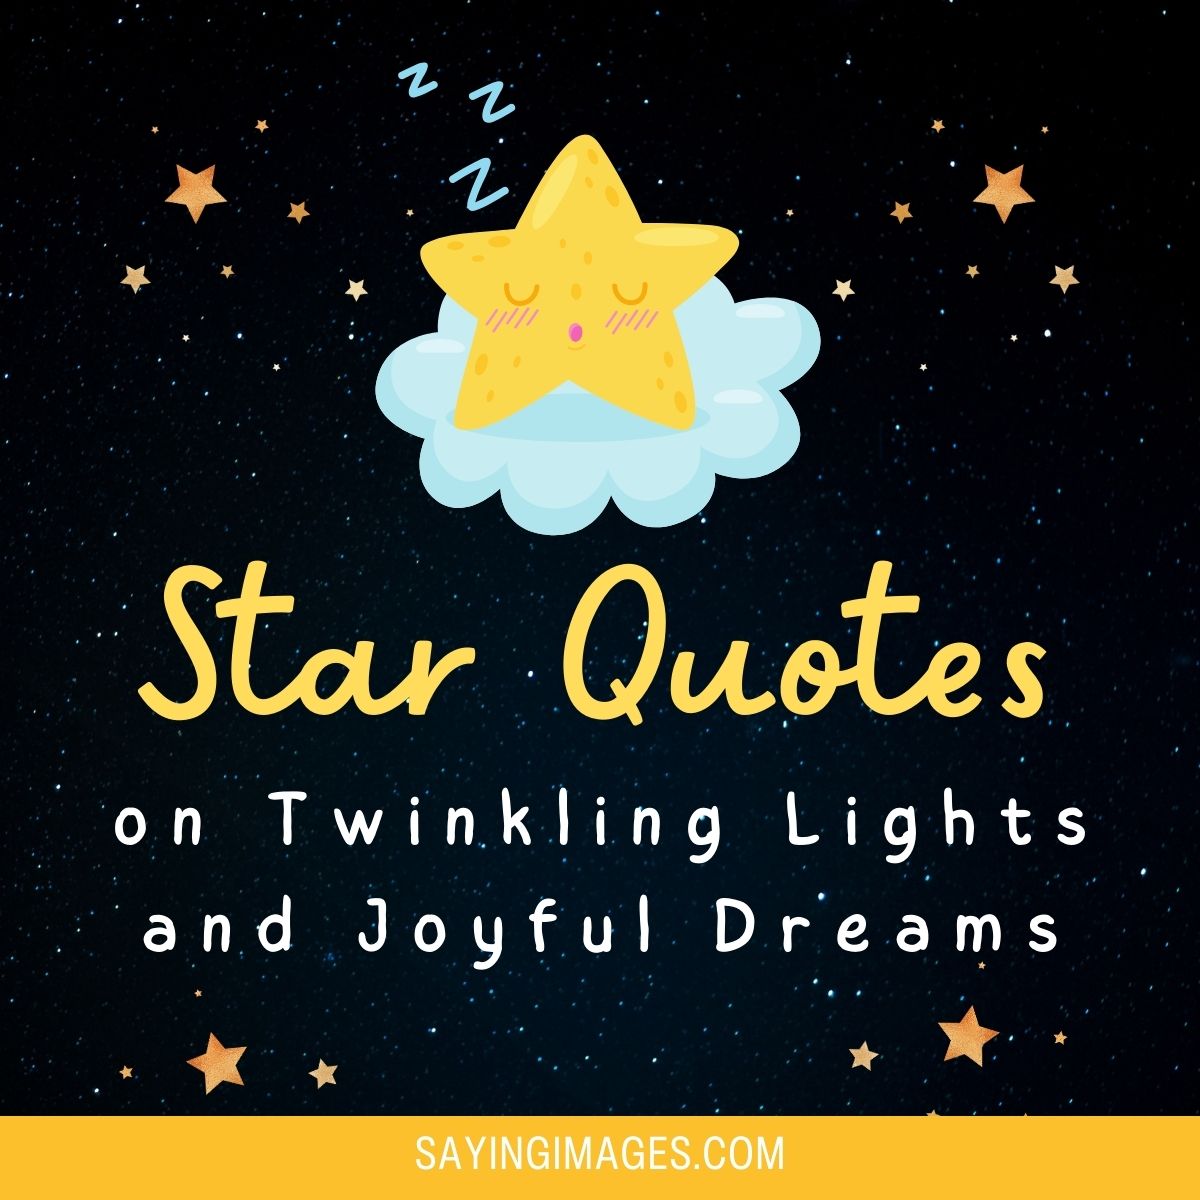 34 Star Quotes on Twinkling Lights and Joyful Dreams